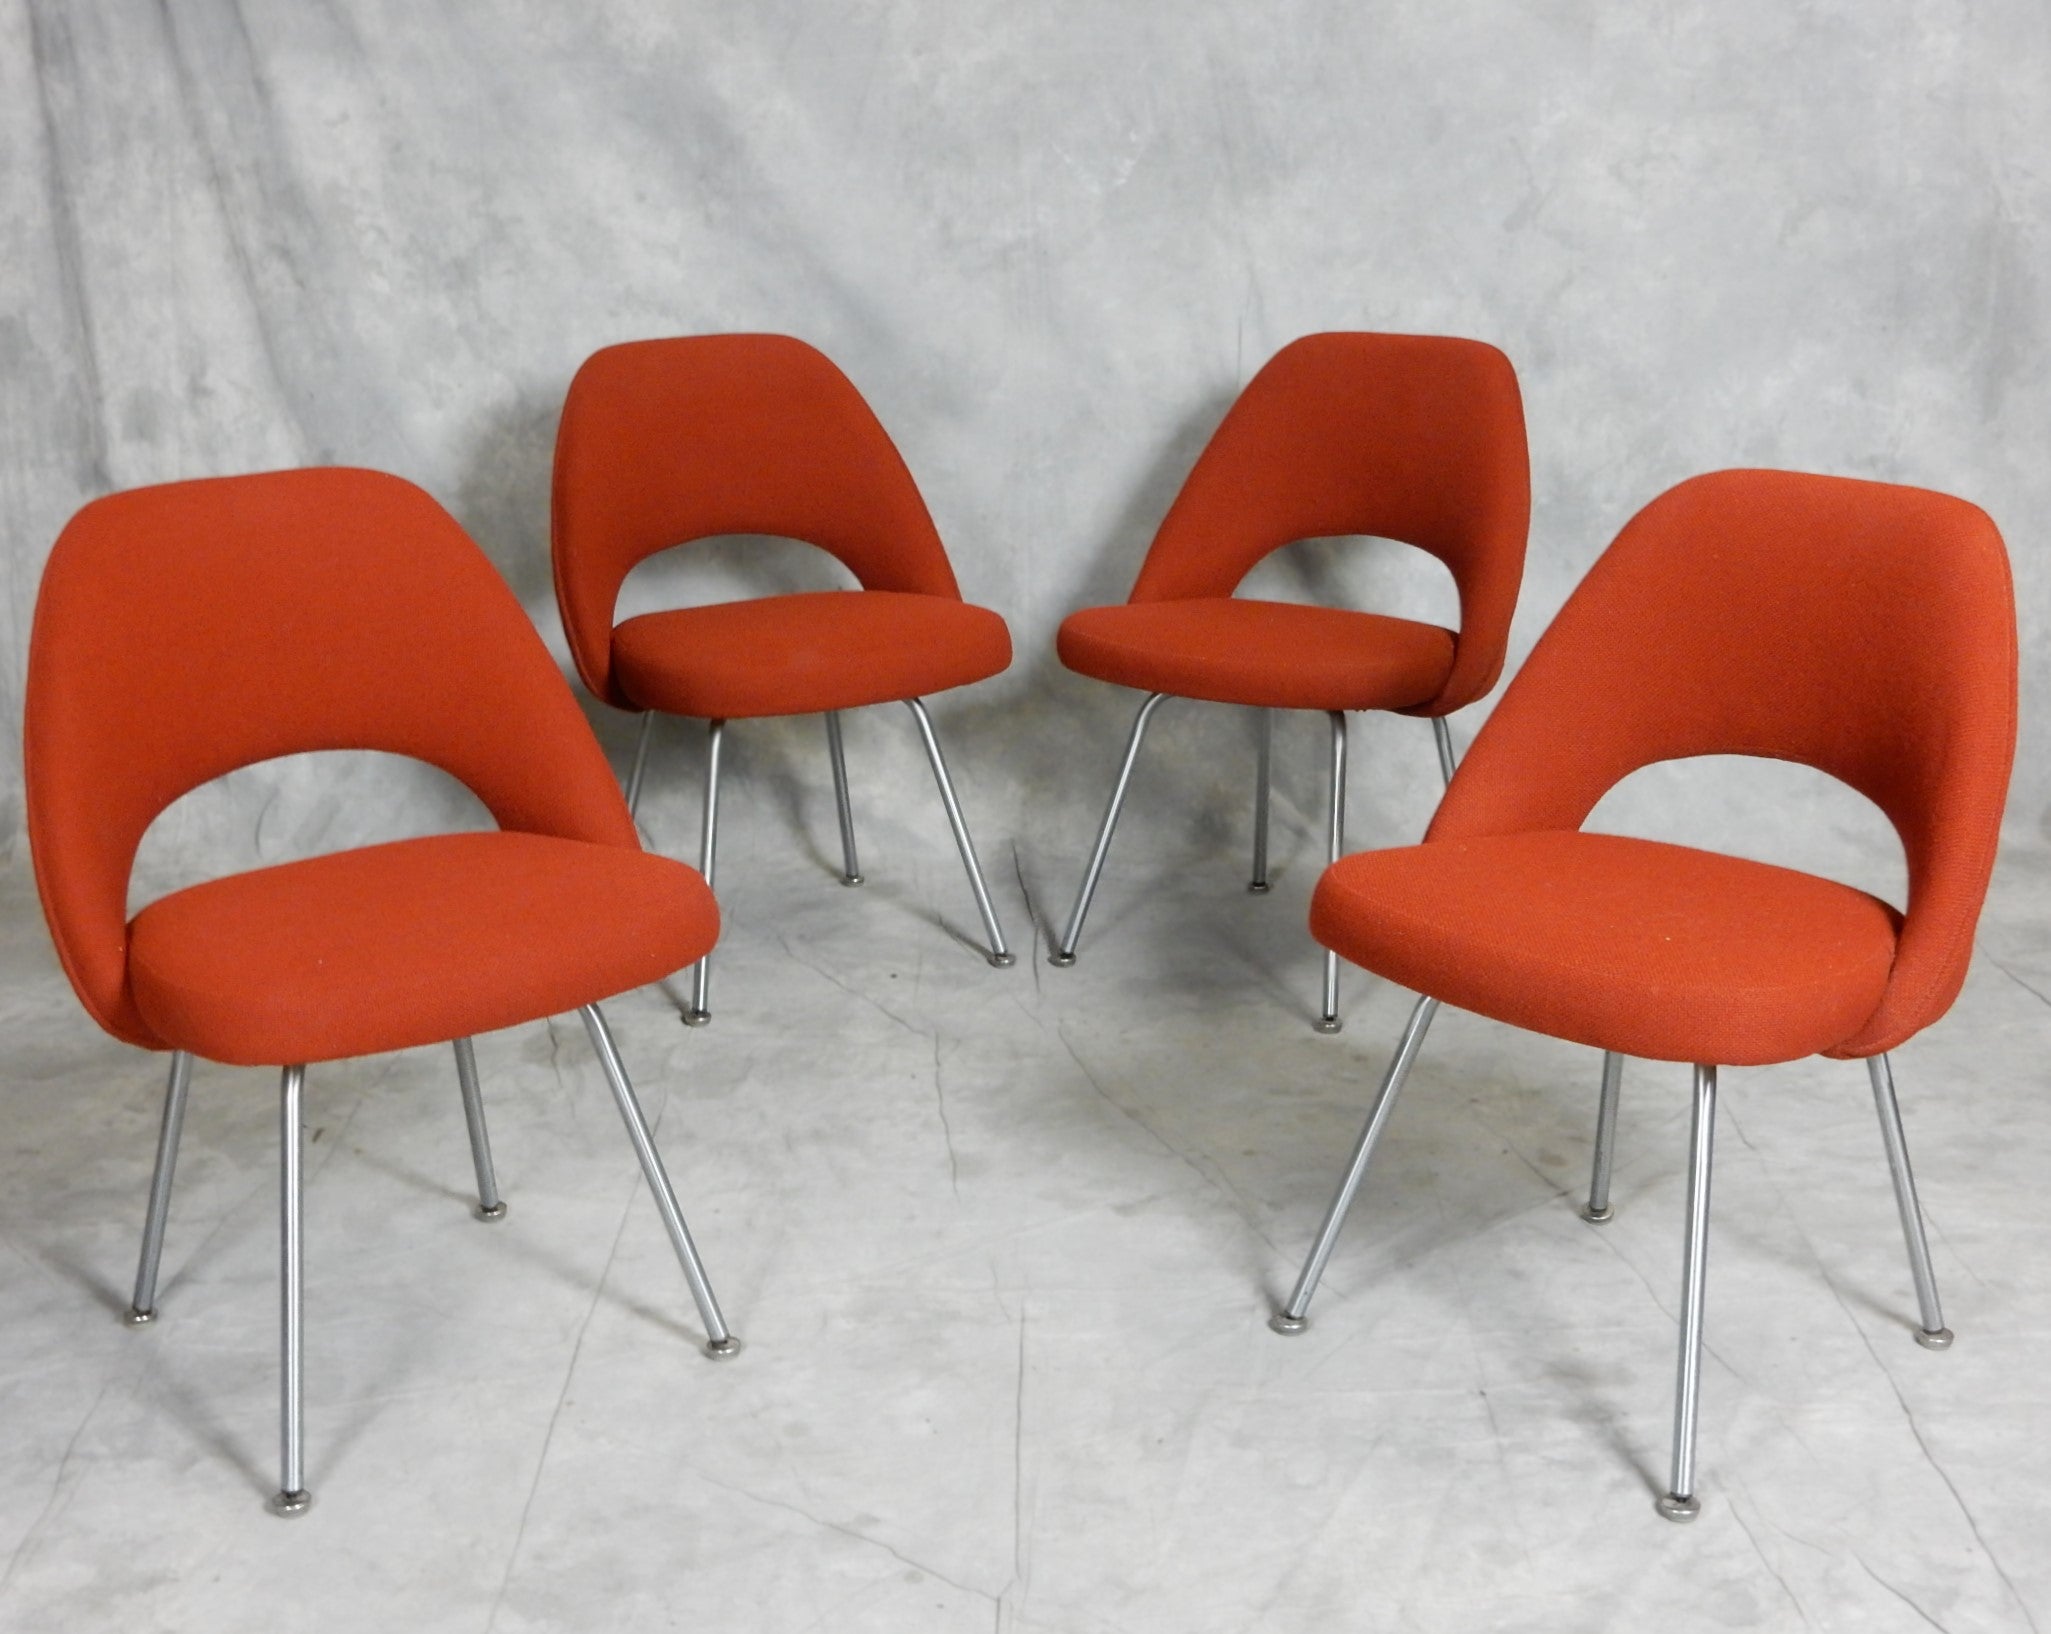 Set of 4 early Eero Saarinen design armless executive chairs from 1963.
Manufactured by Knoll International. Deep red wool upholstery.
Brushed aluminum legs. One has an aluminum plate on underside marked 